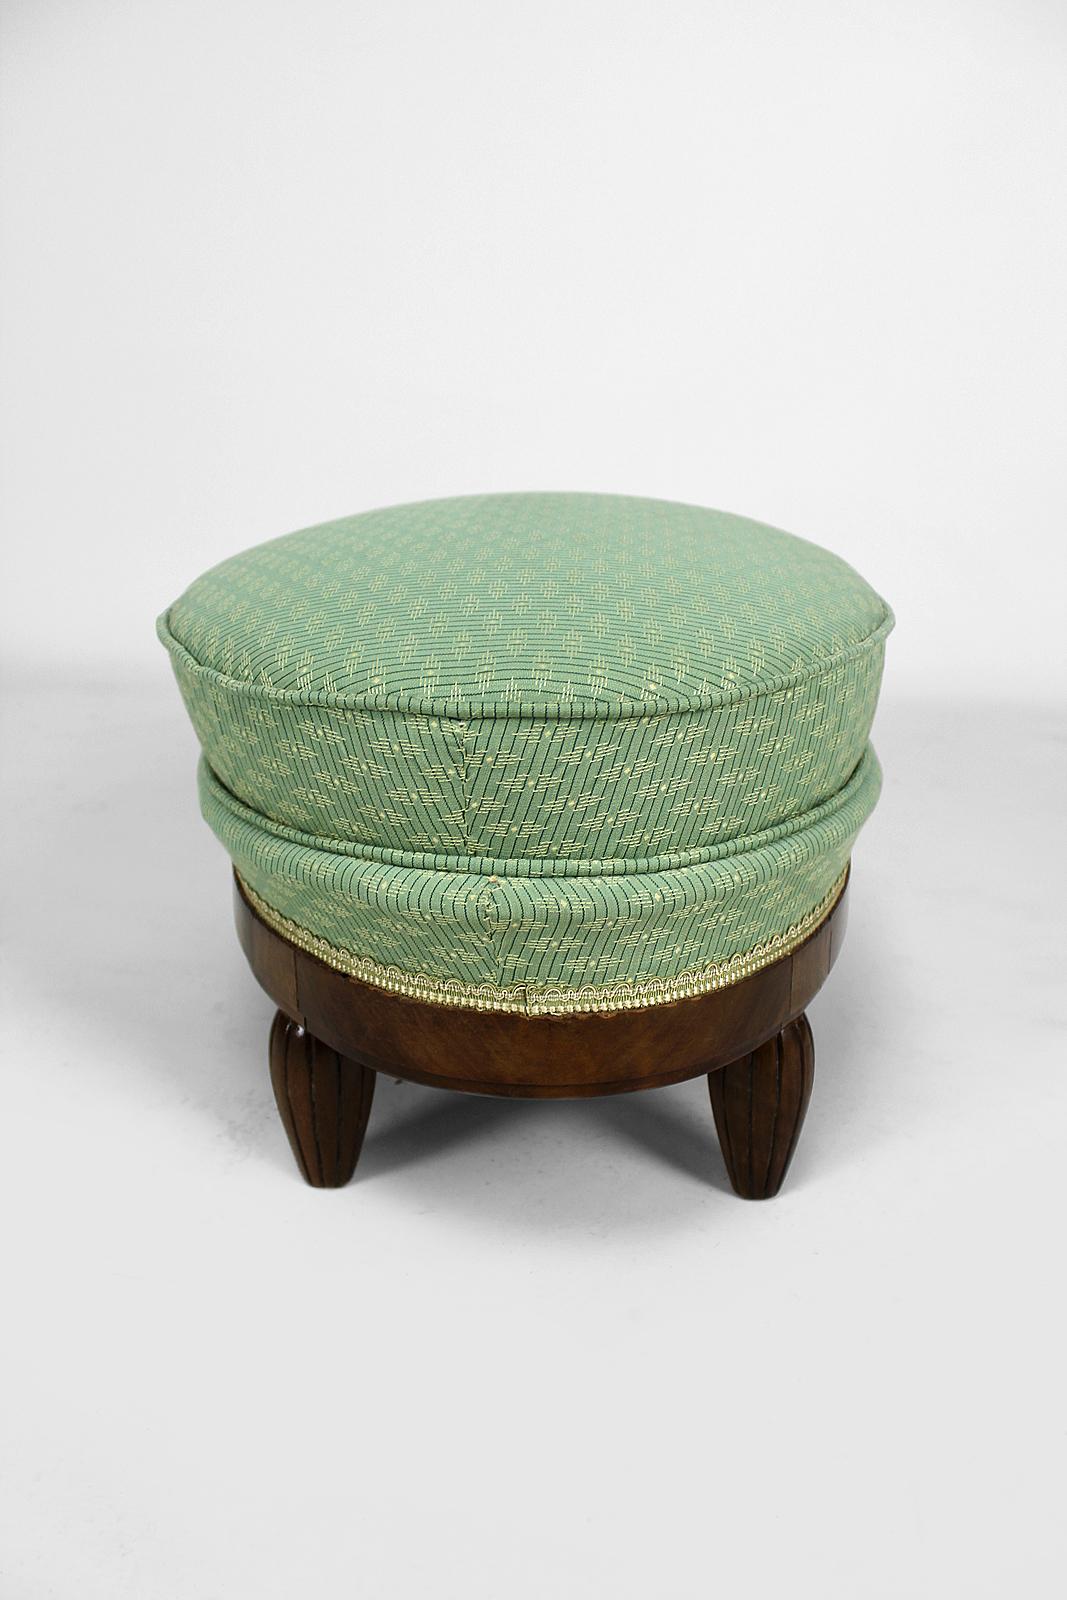 Art Deco Psyche Dressing Table and Pouf by Ateliers Gauthier-Poinsignon, c. 1920 For Sale 13